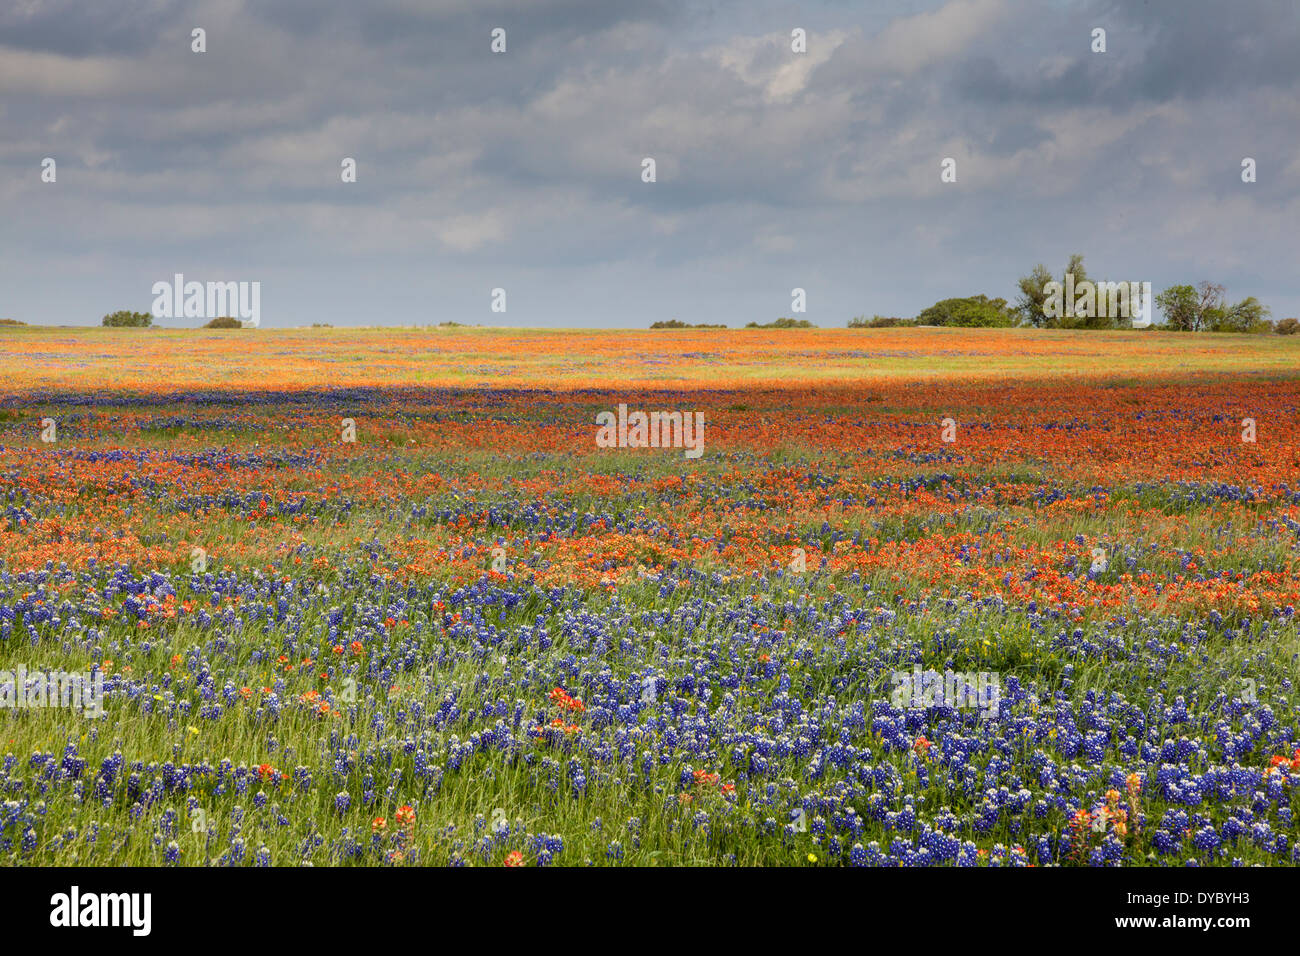 Field of Texas Bluebonnets and Indian Paintbrush wildflowers with sun and shadows along Texas FM 362 at Whitehall, Texas. Stock Photo